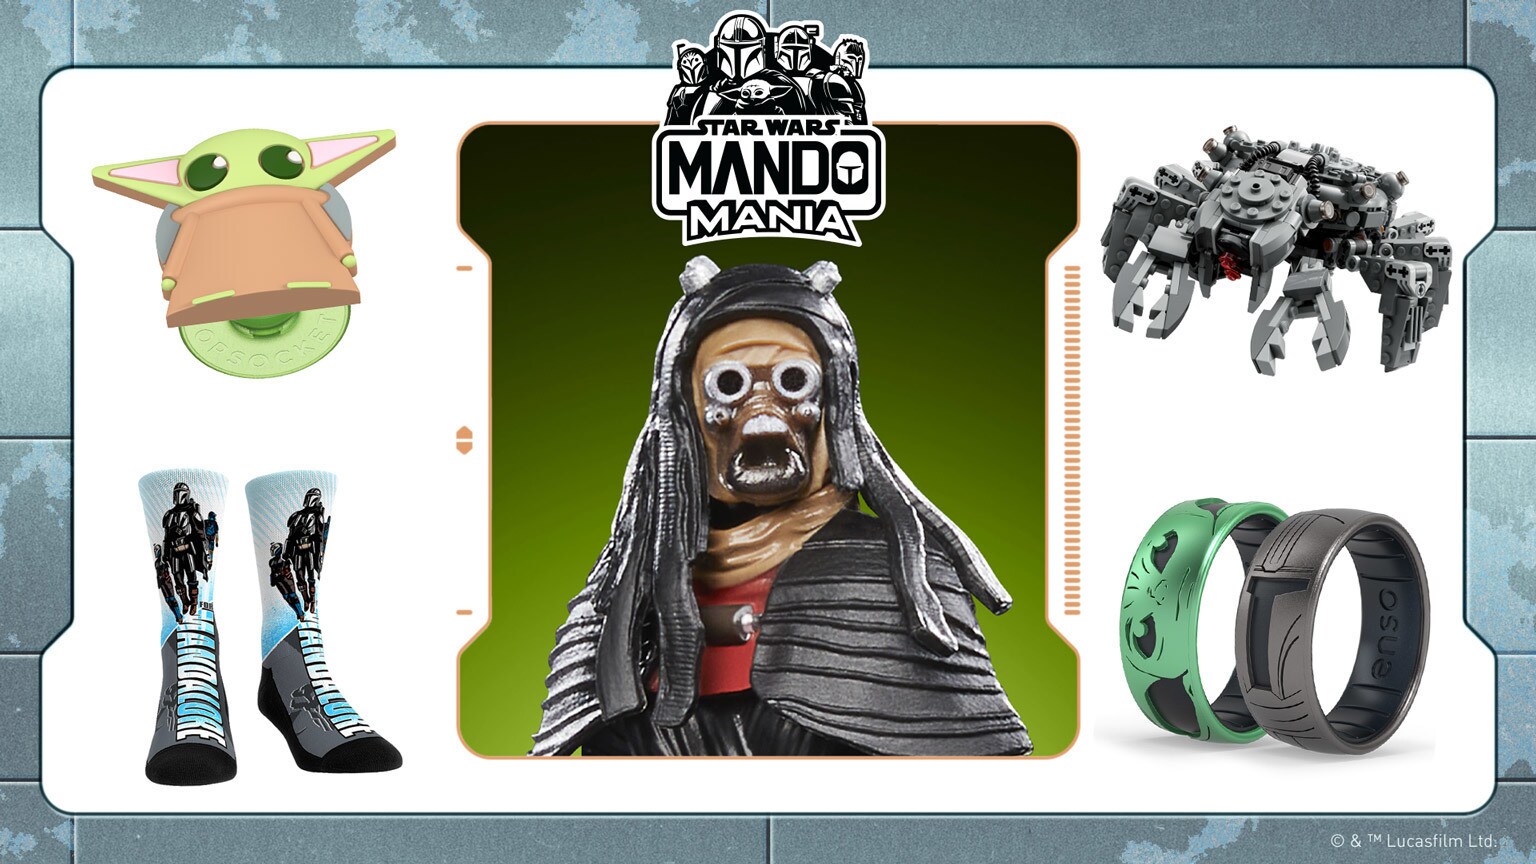 Mando Mania” Kicks Off with New Products and Collectible Highlights